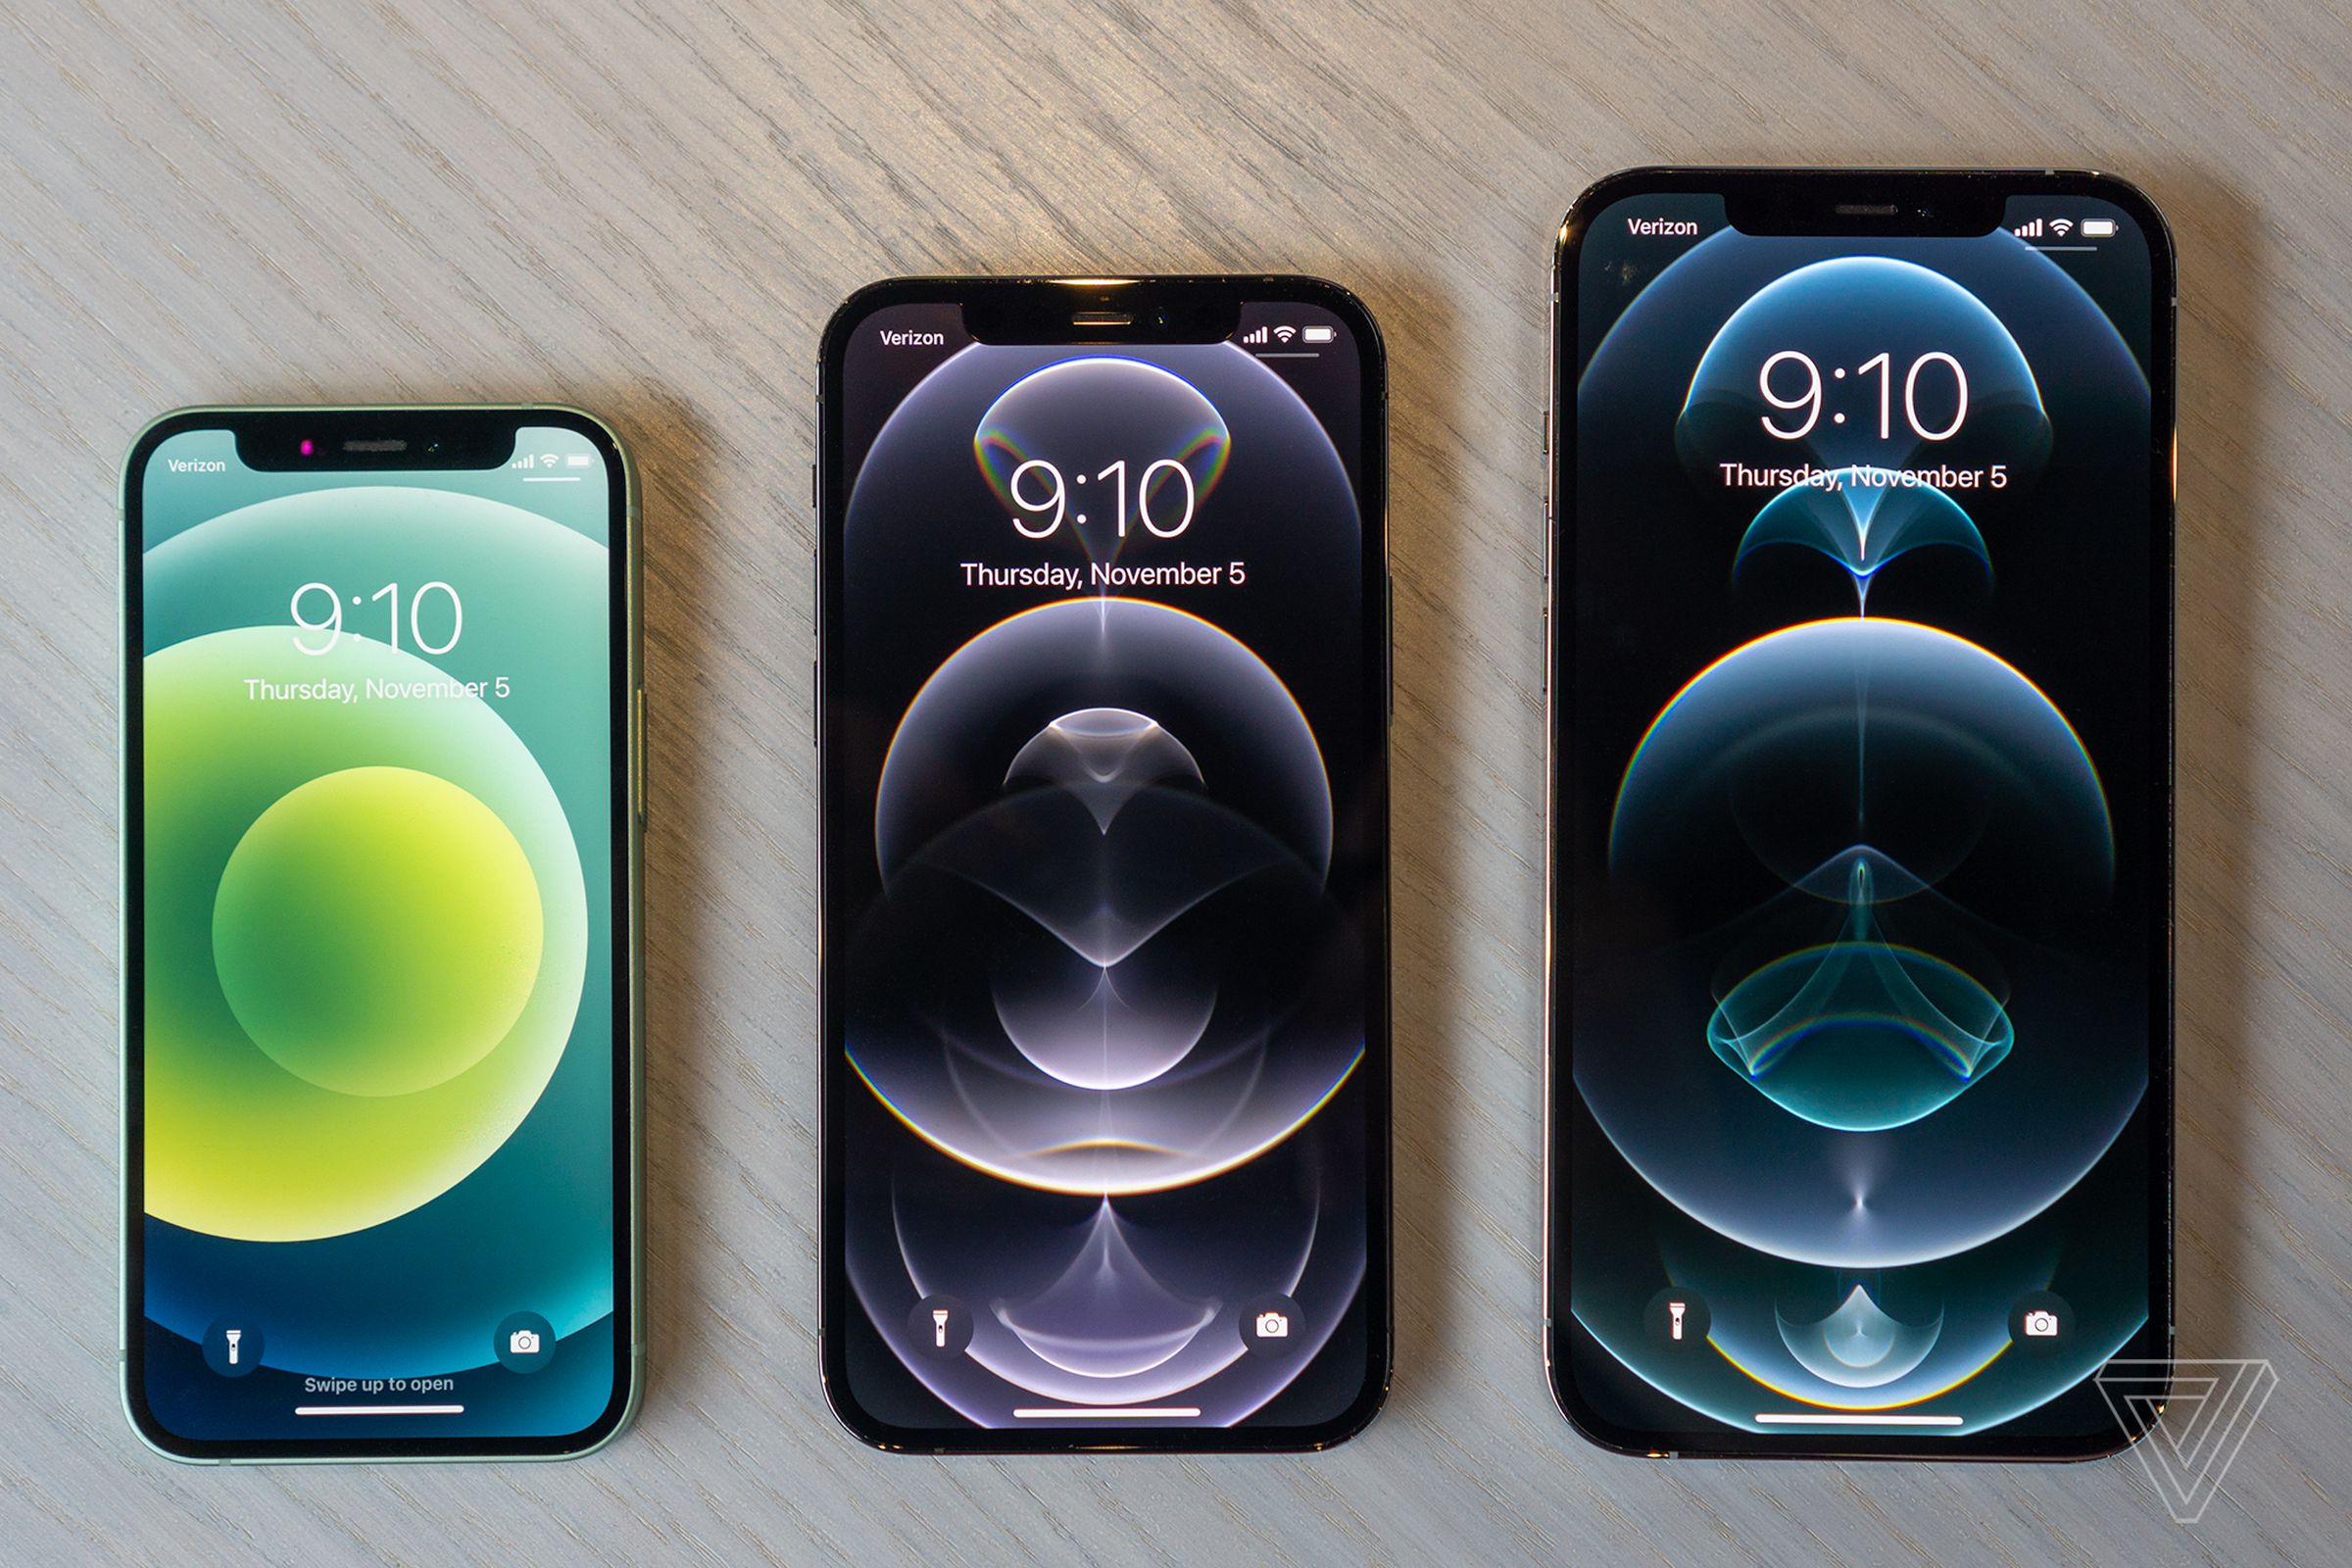 From left to right: the iPhone 12 mini, iPhone 12 Pro, and iPhone 12 Pro Max.